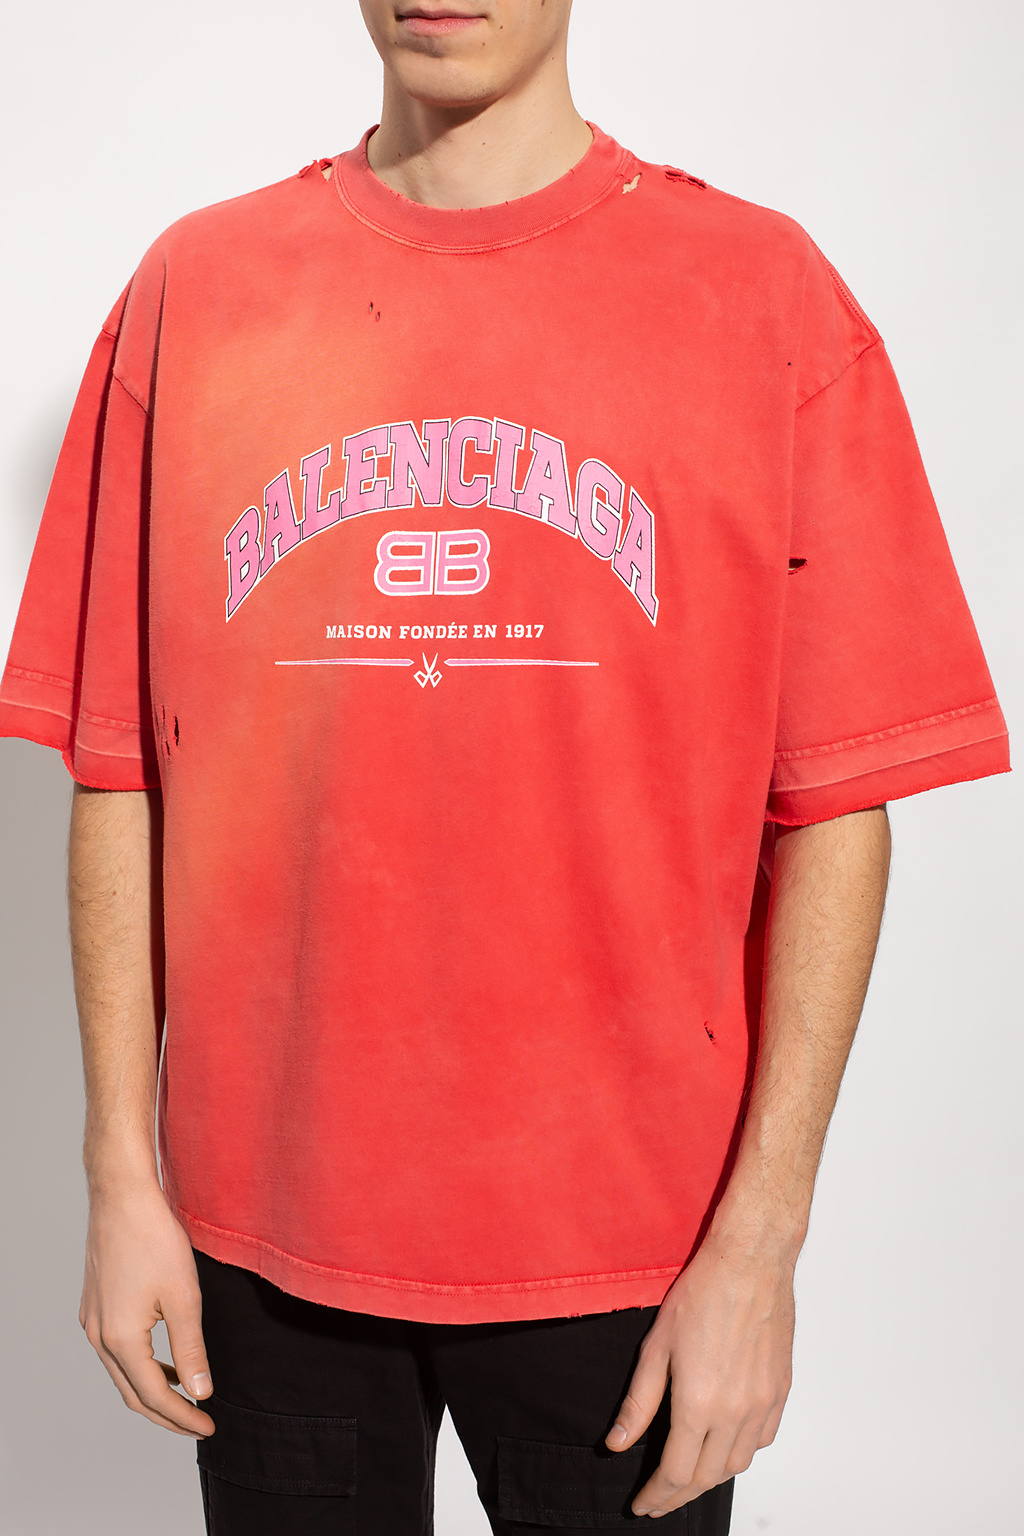 BALENCIAGA Dry Cleaning Boxy Tshirt in Vintage Jersey